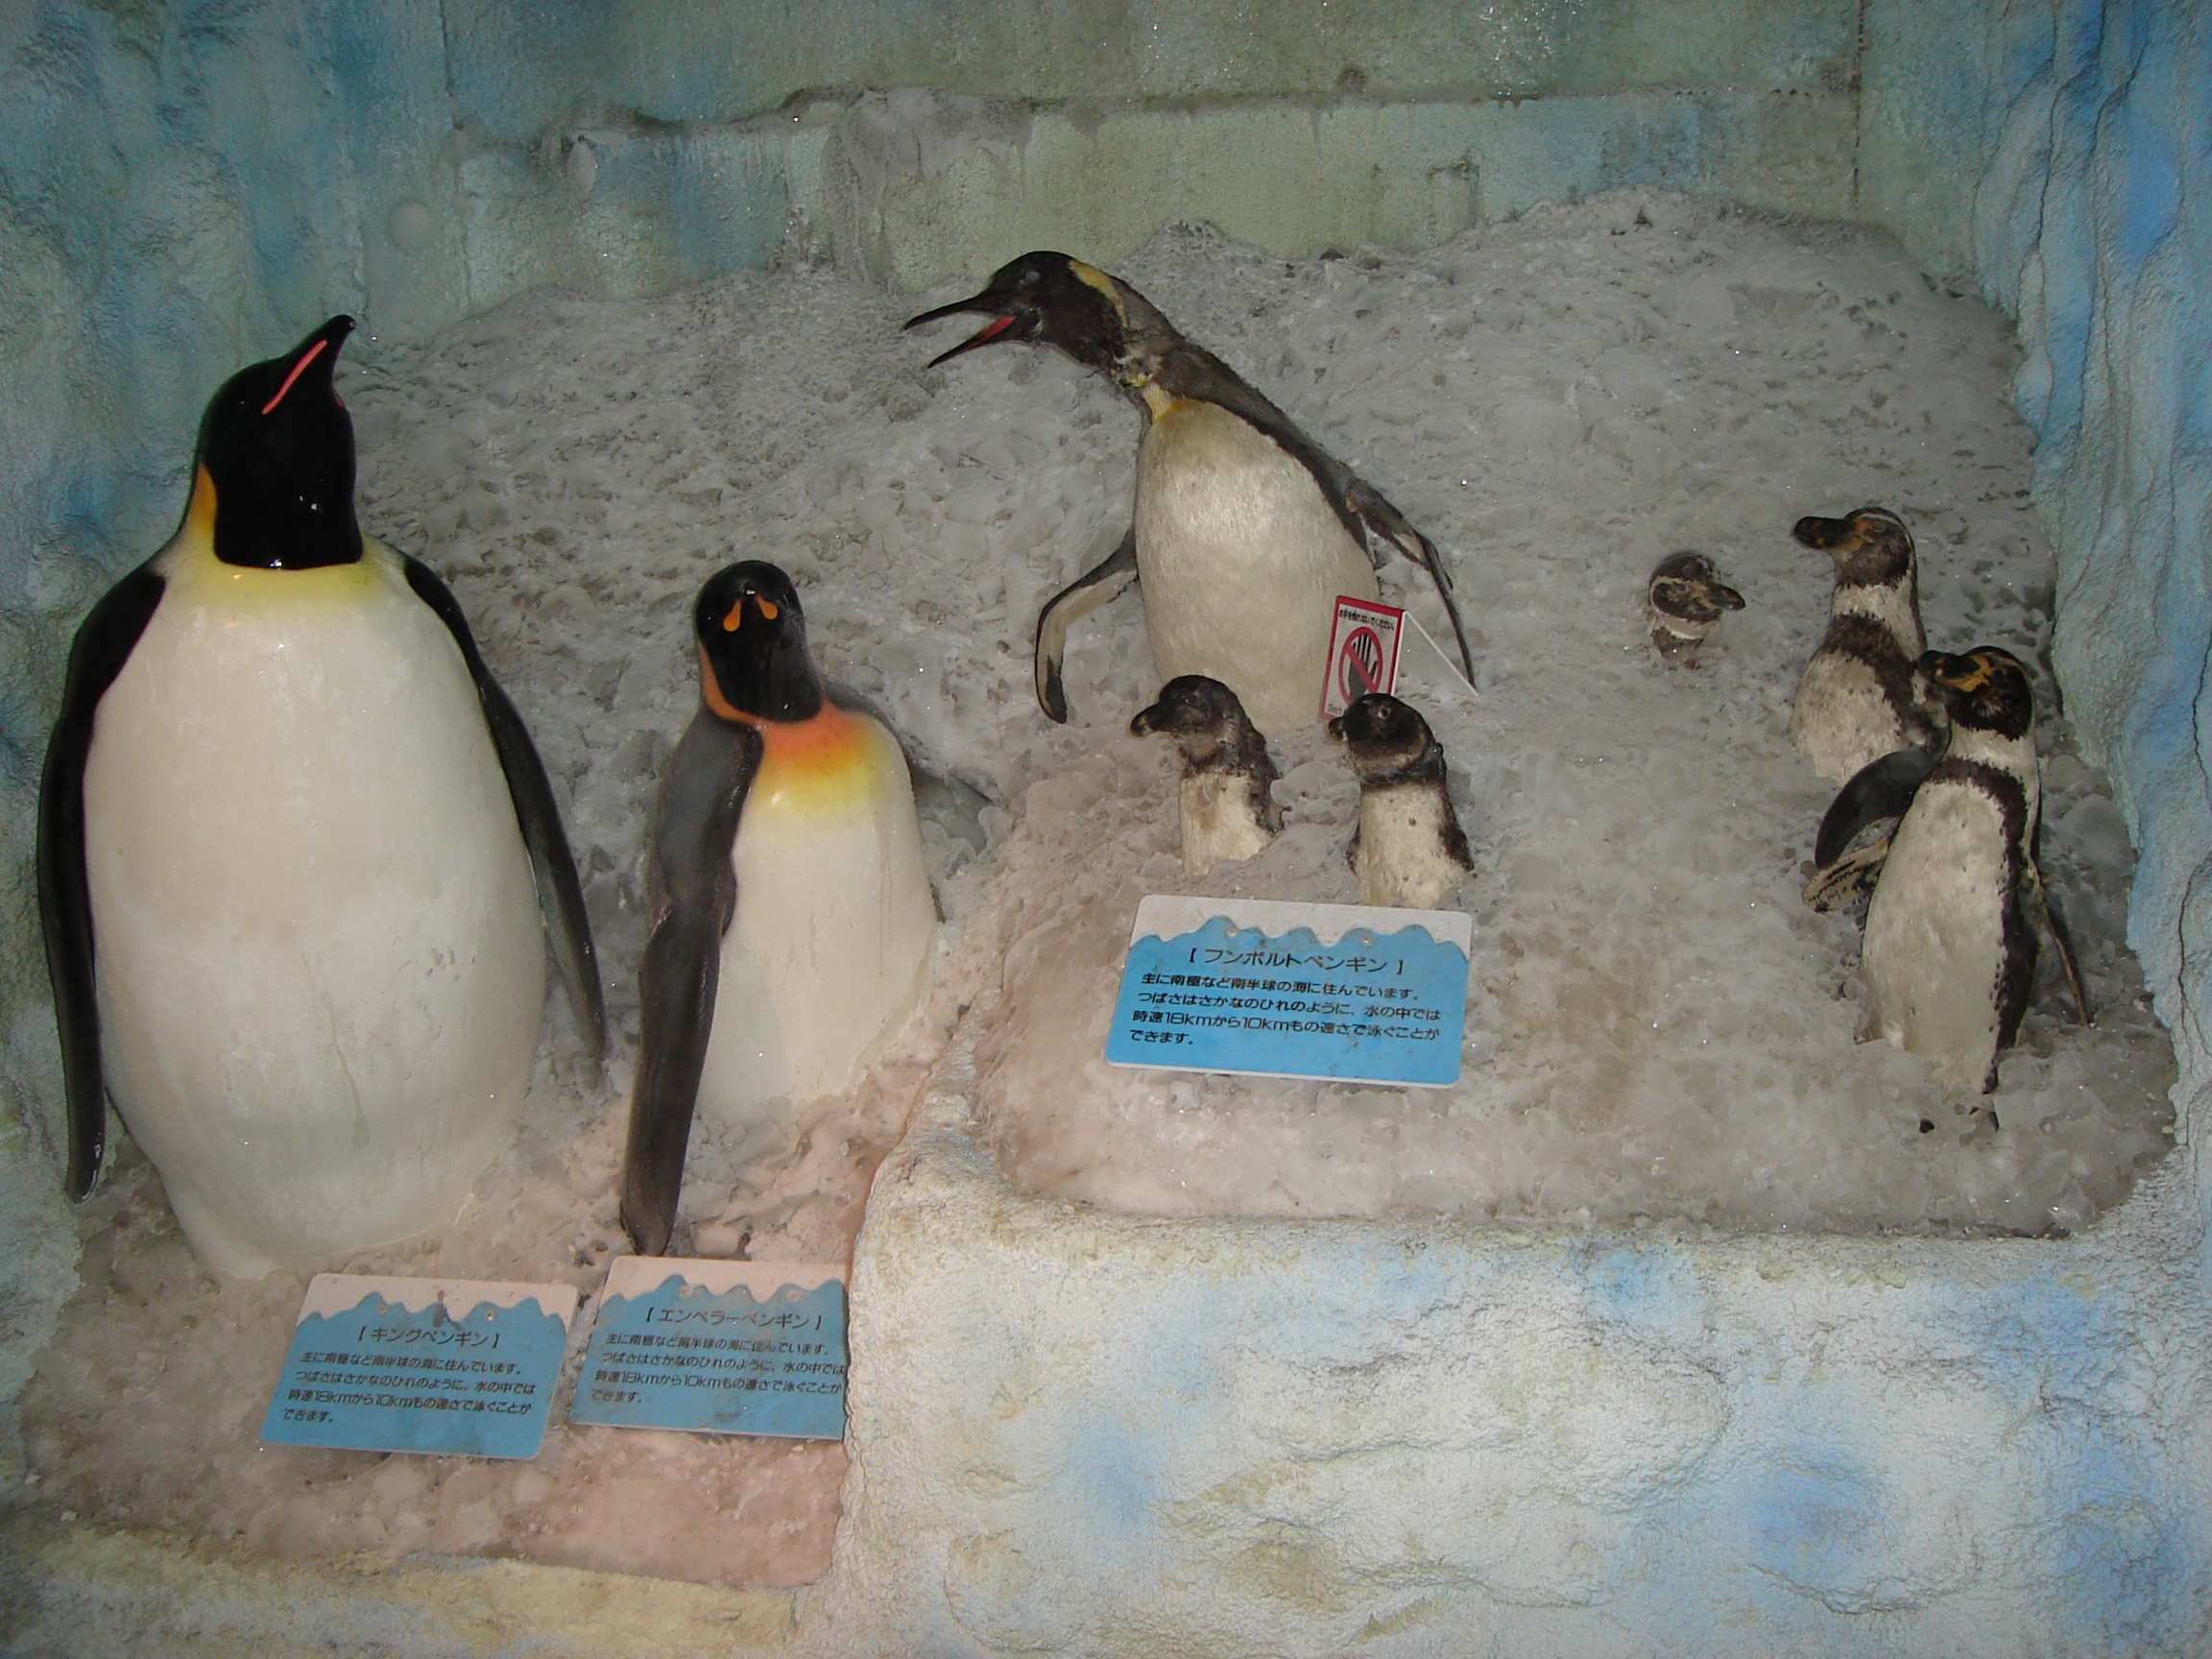 model penguins in a display of artificial ice and snow